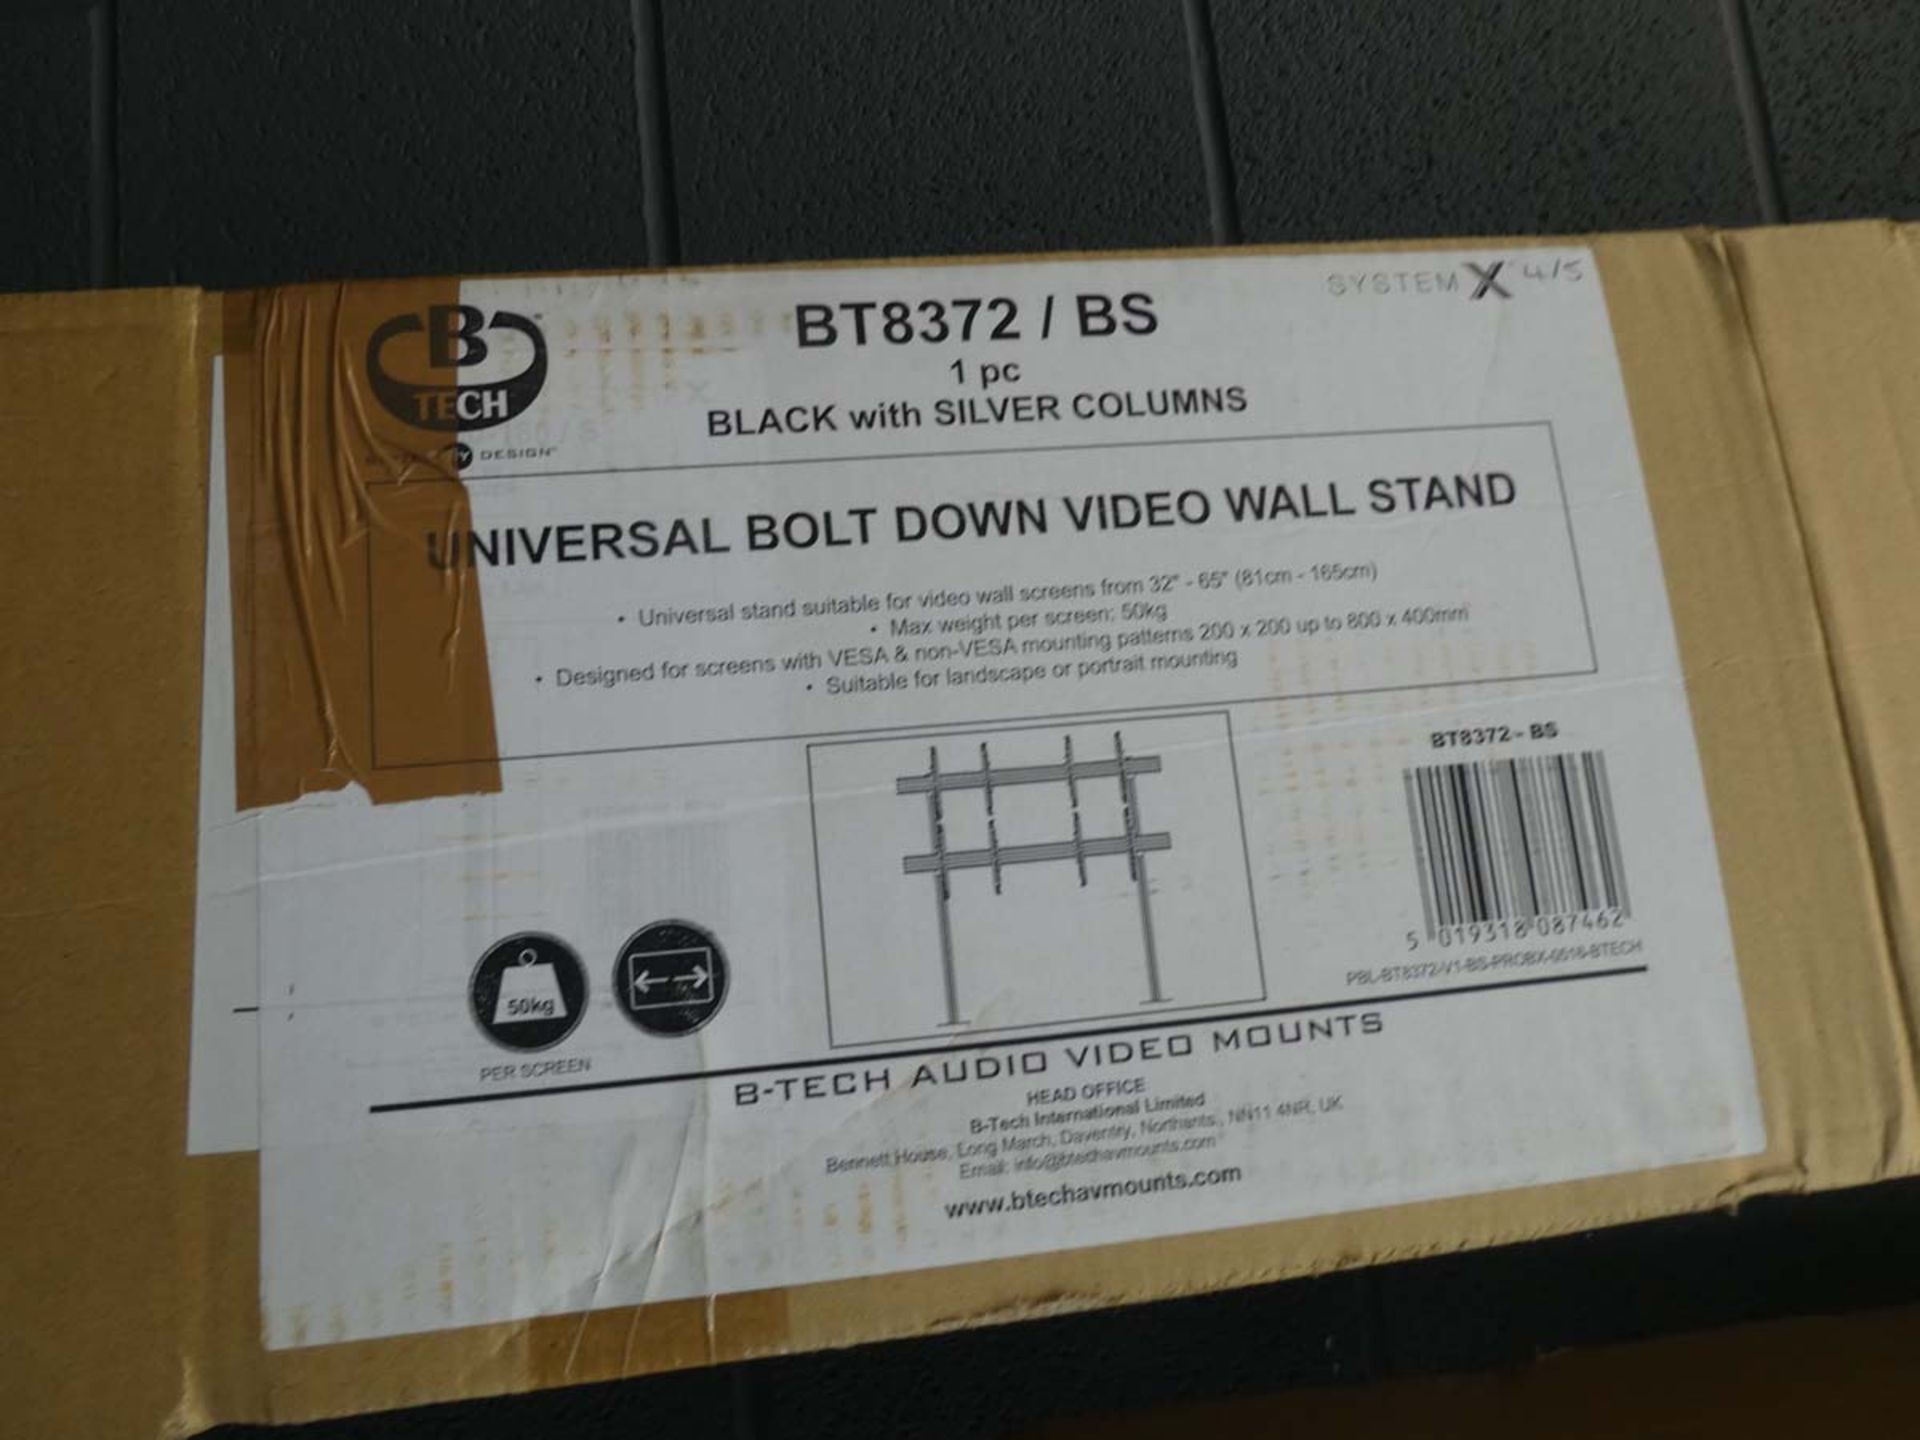 2 Universal video wall stands